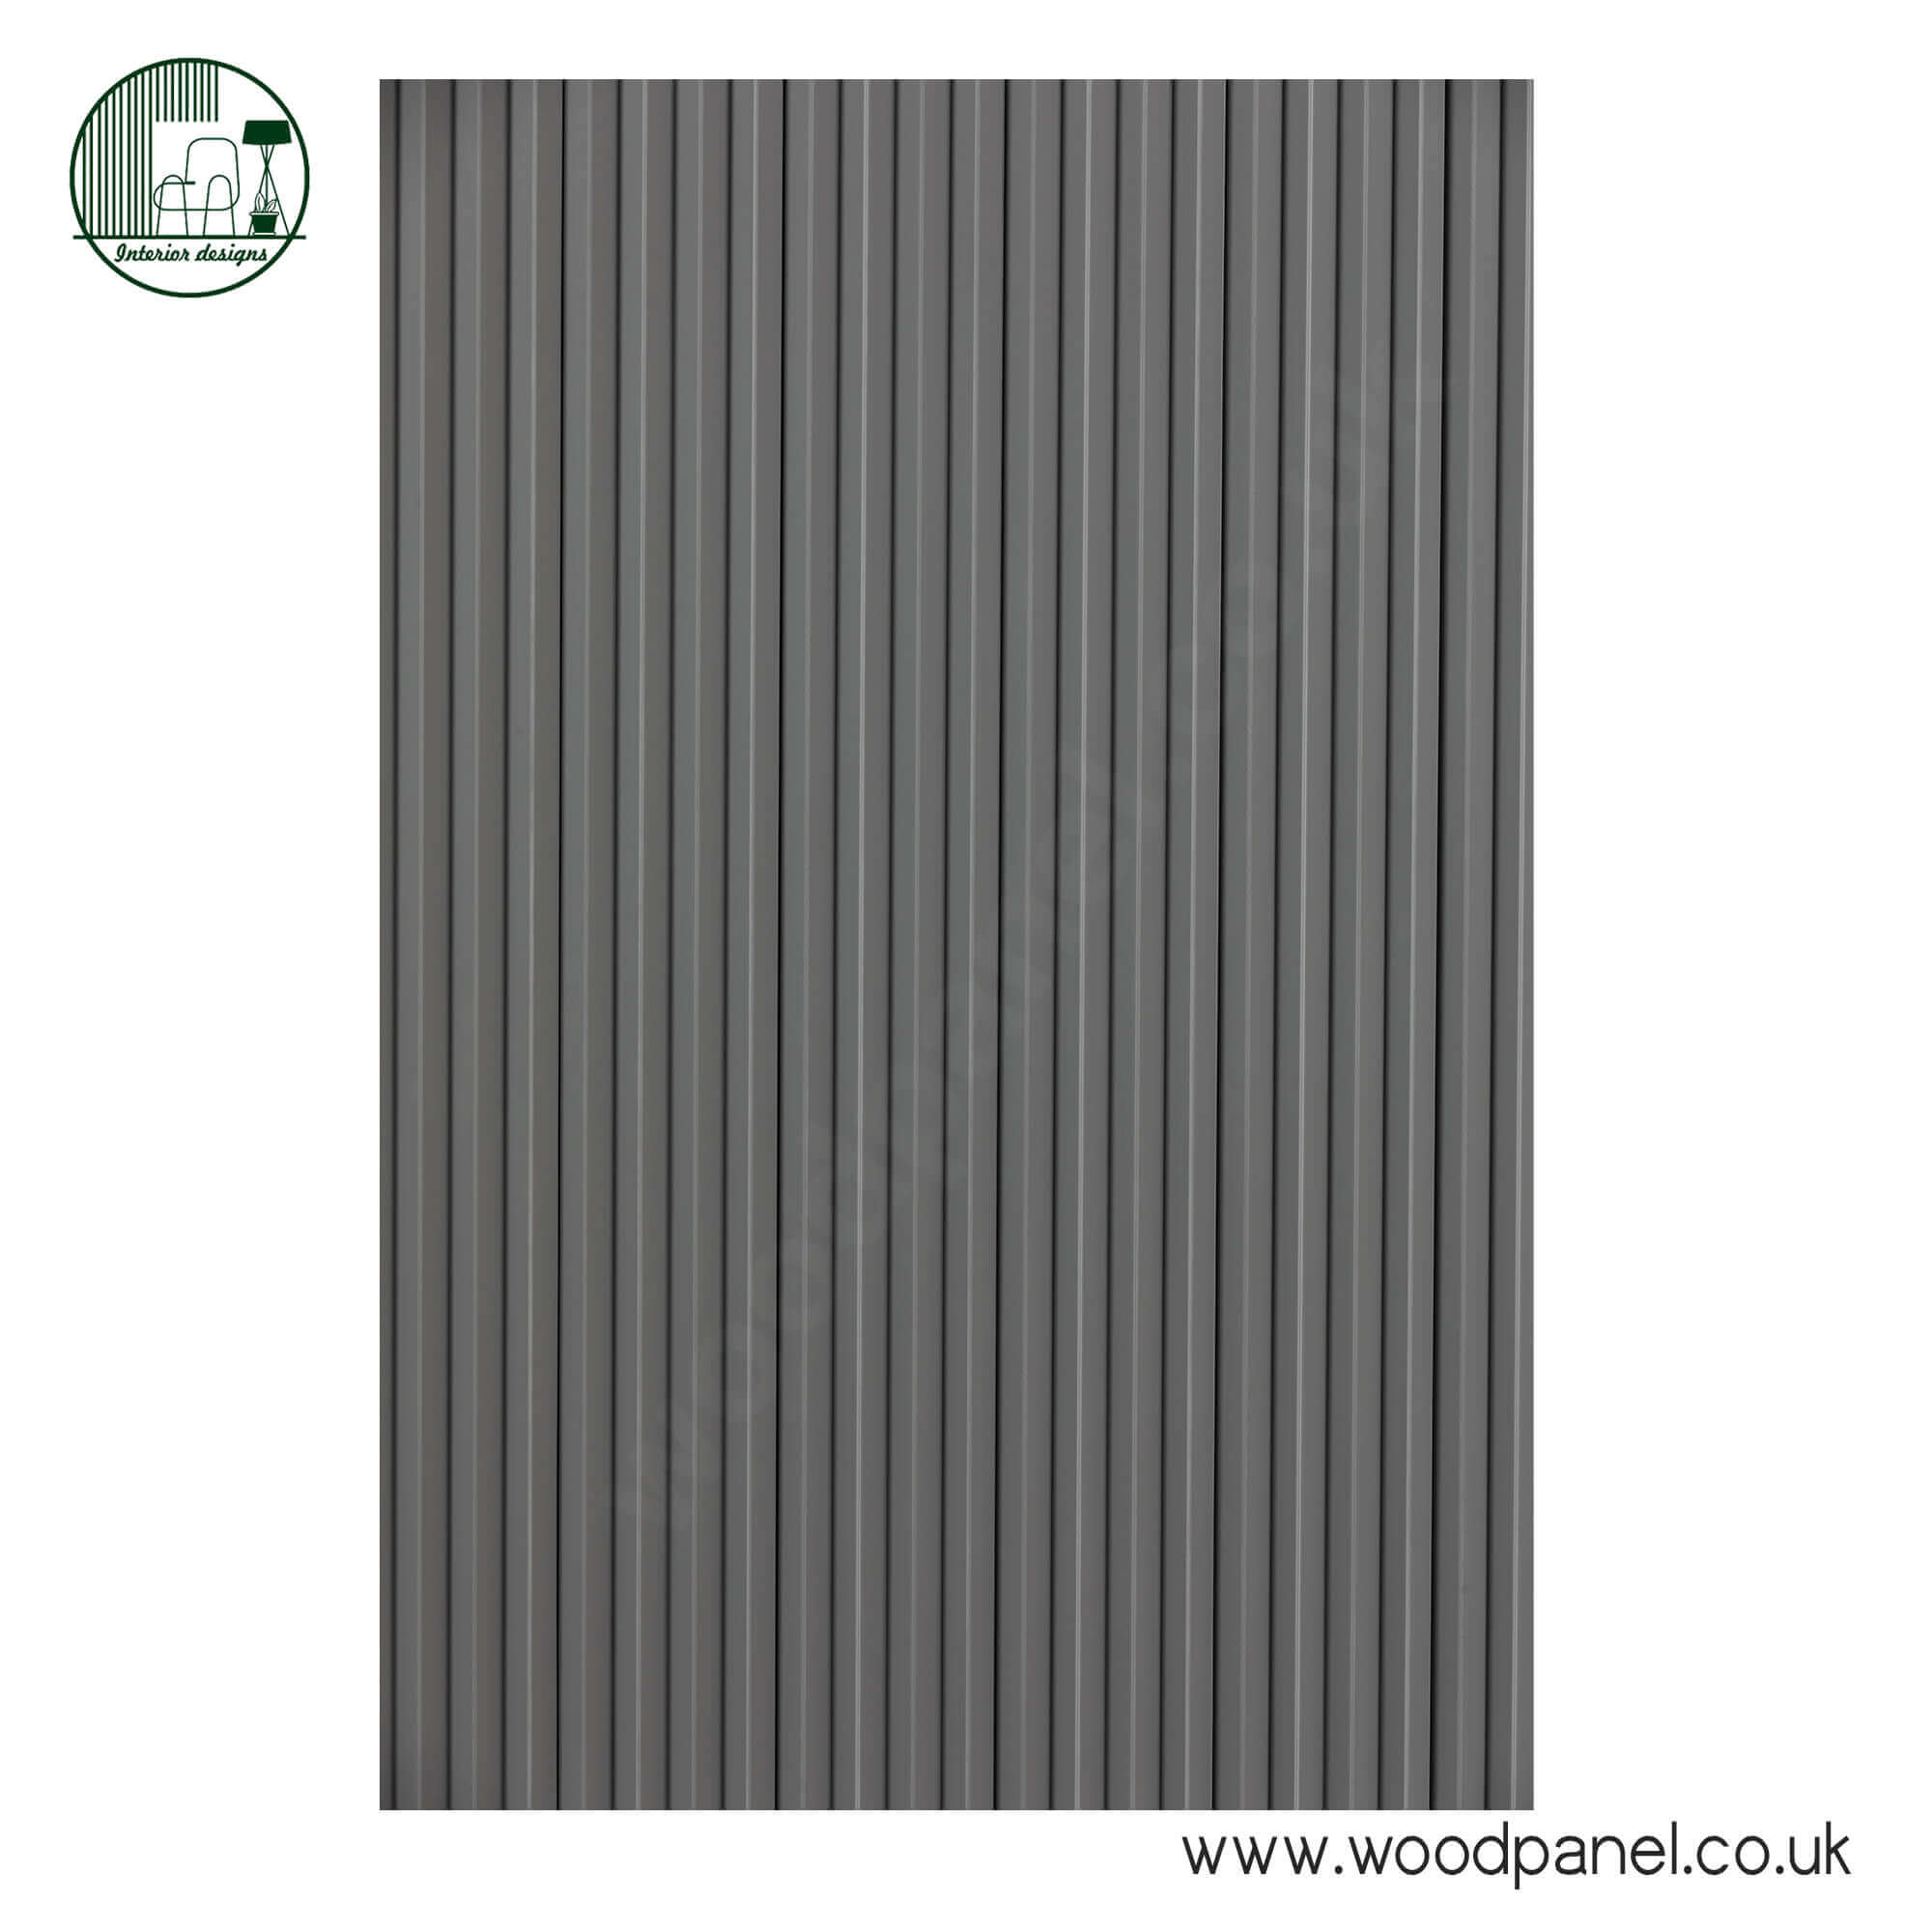 Synergy Wood Panel U963 Diamond Grey SOFT TOUCH ST122 6PCS in a pack